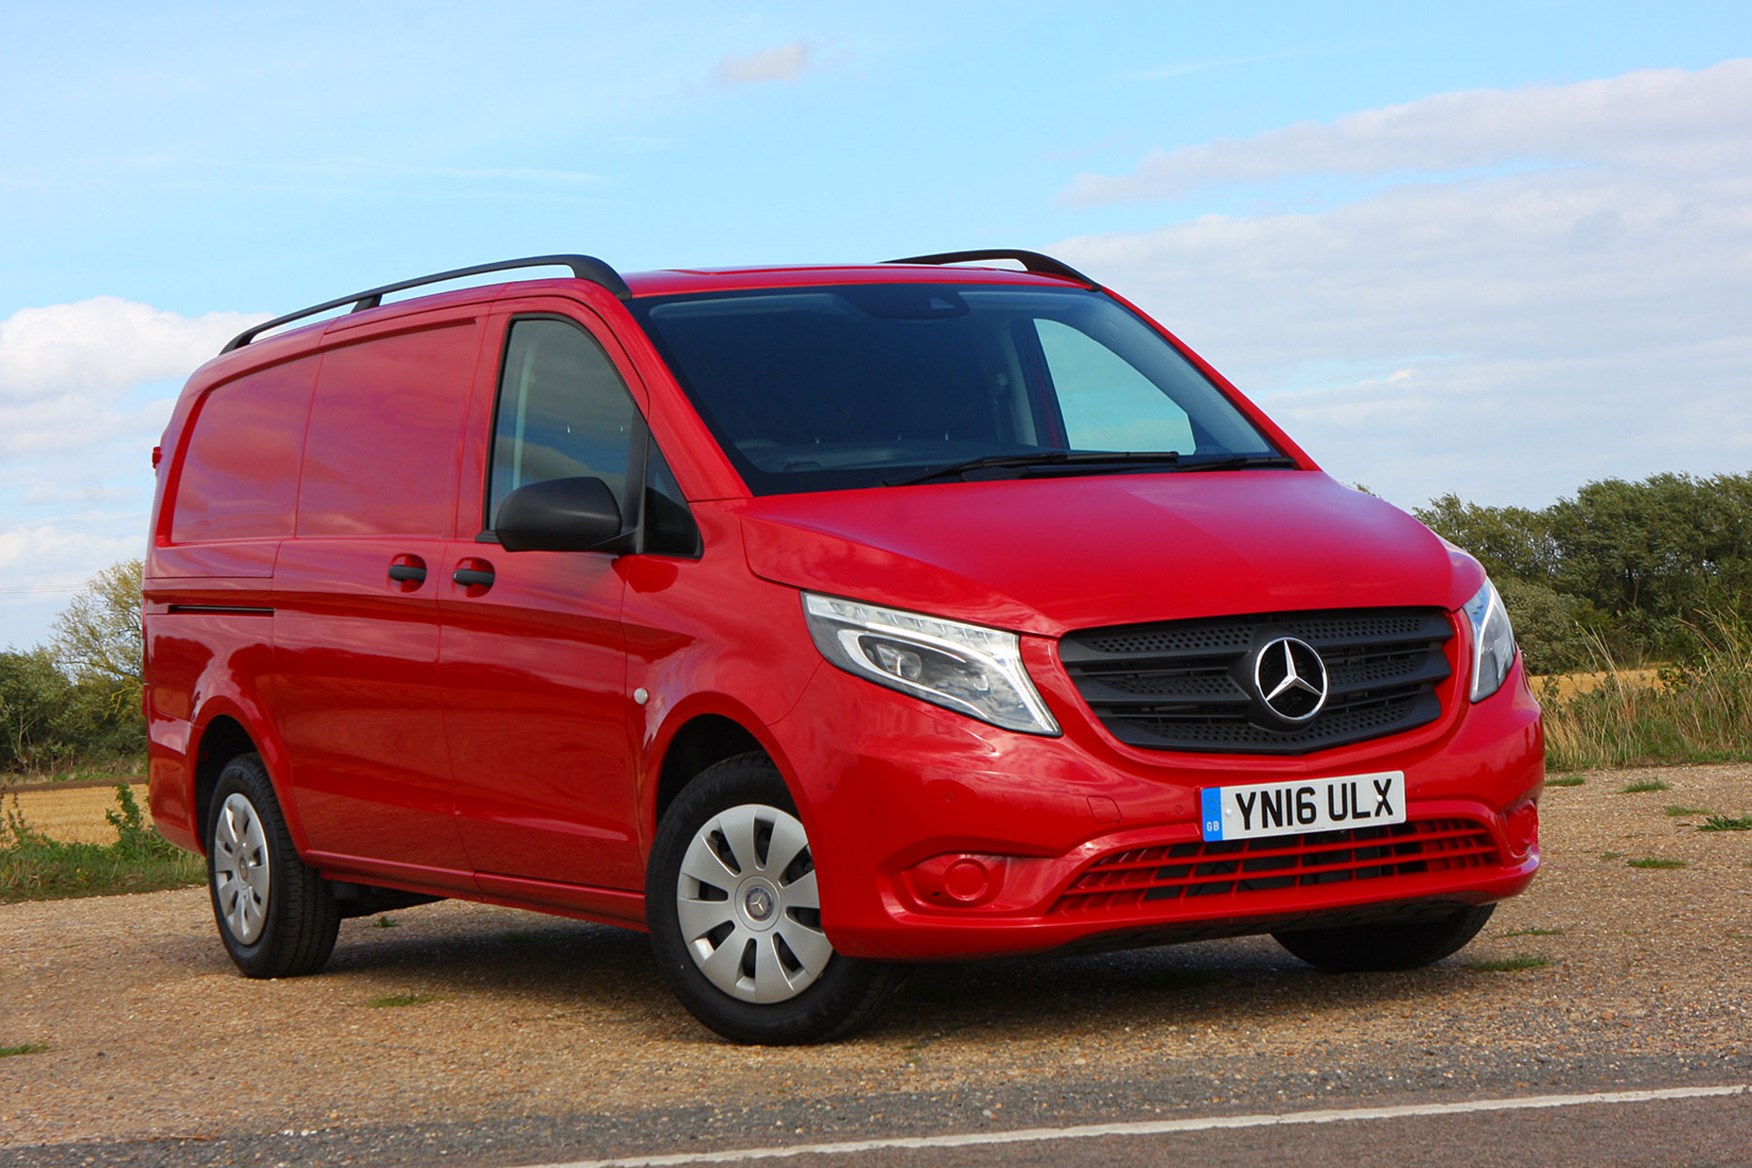 Mercedes-Benz Vito 111CDi Long review - front view, red